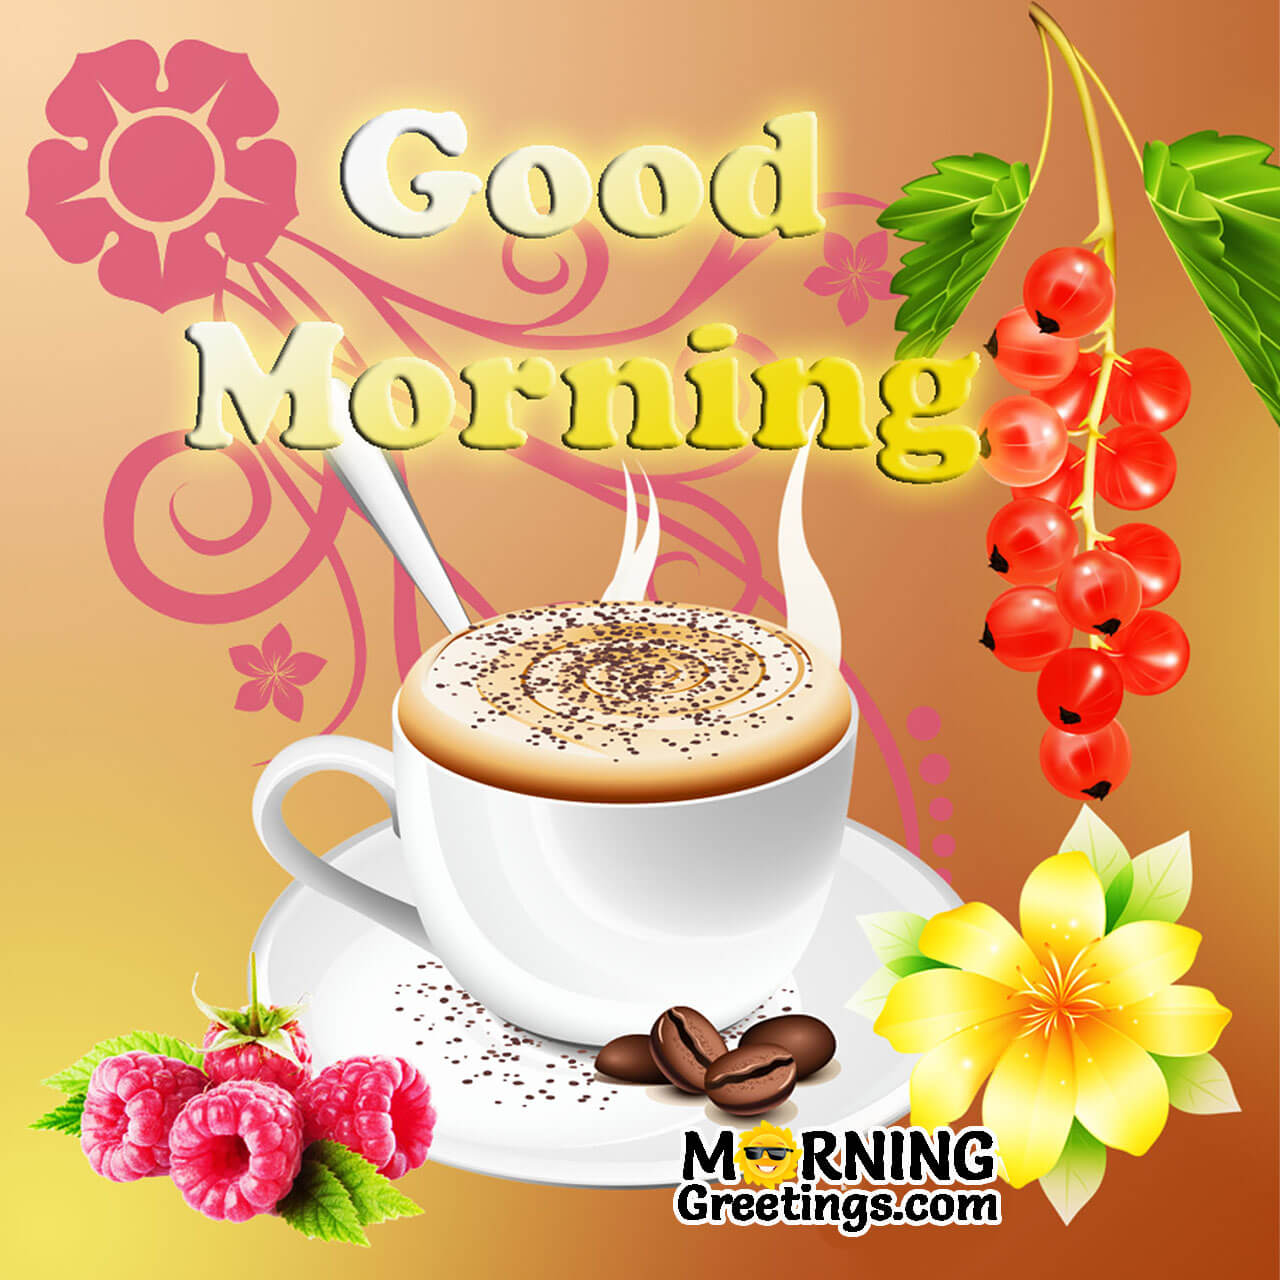 10 Fresh Good Morning For Coffee Lovers - Morning Greetings ...